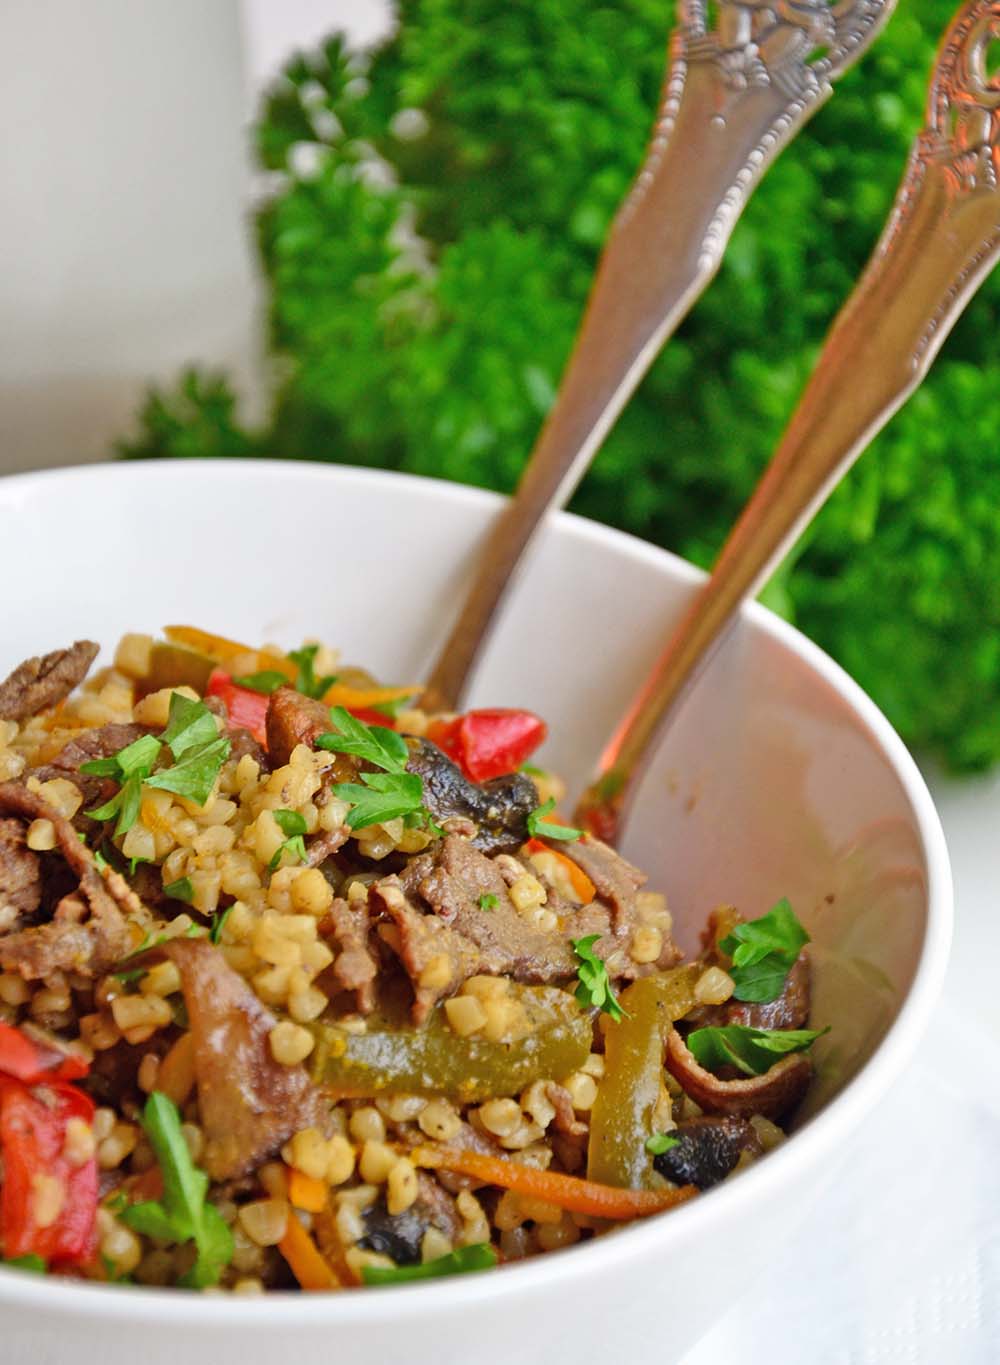 Beef stir fry with ginger sauce